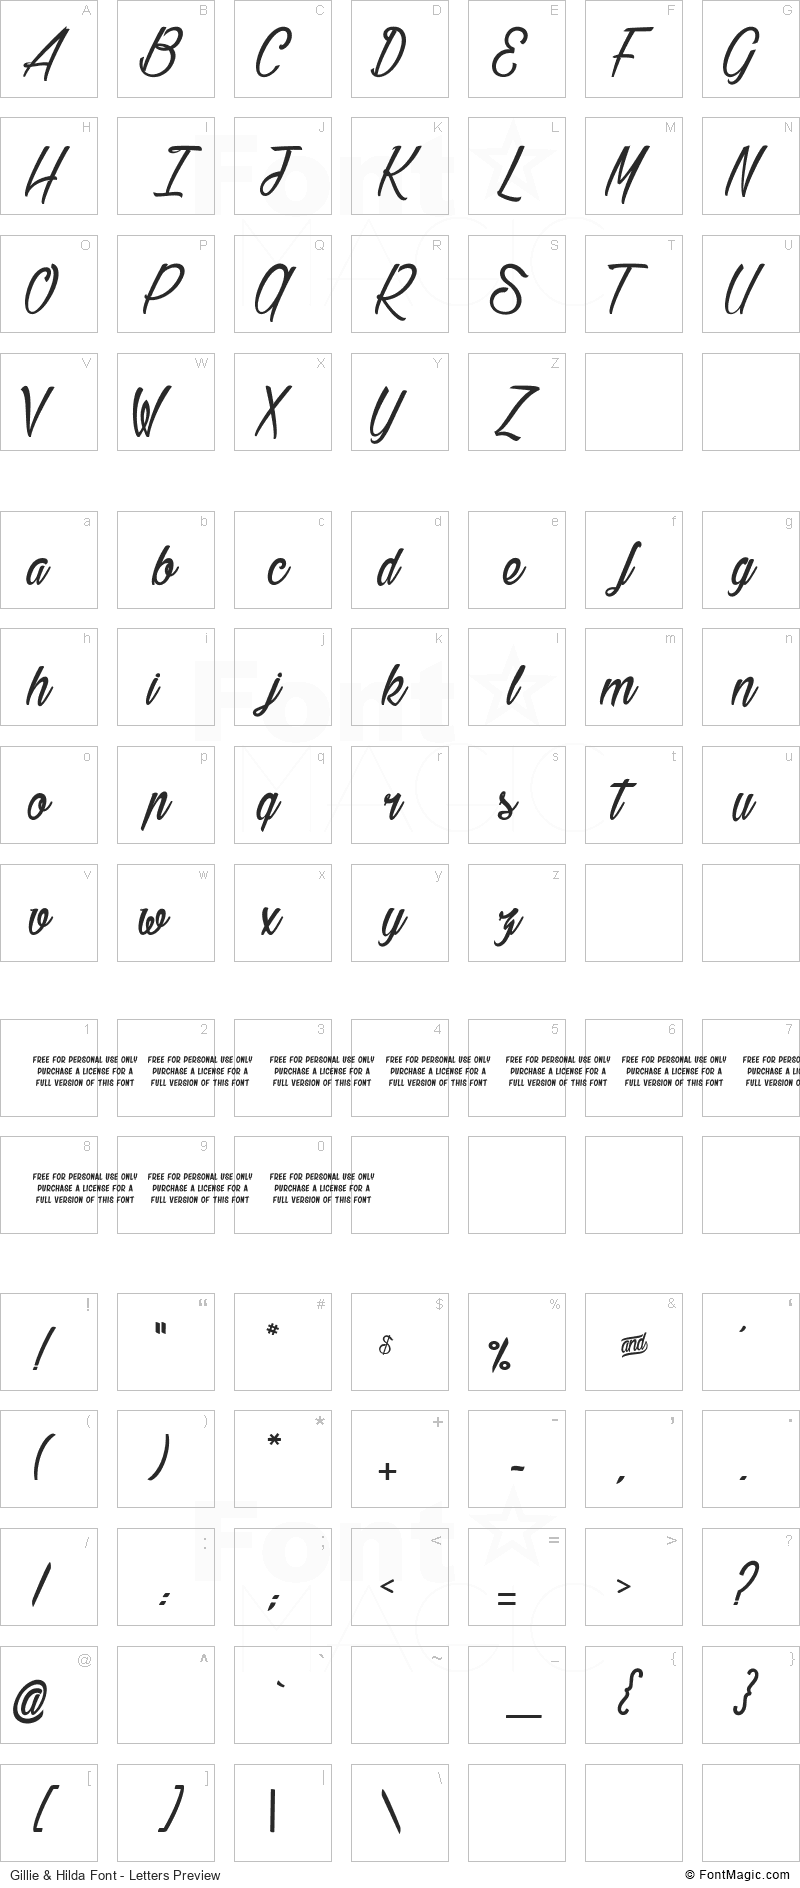 Gillie & Hilda Font - All Latters Preview Chart